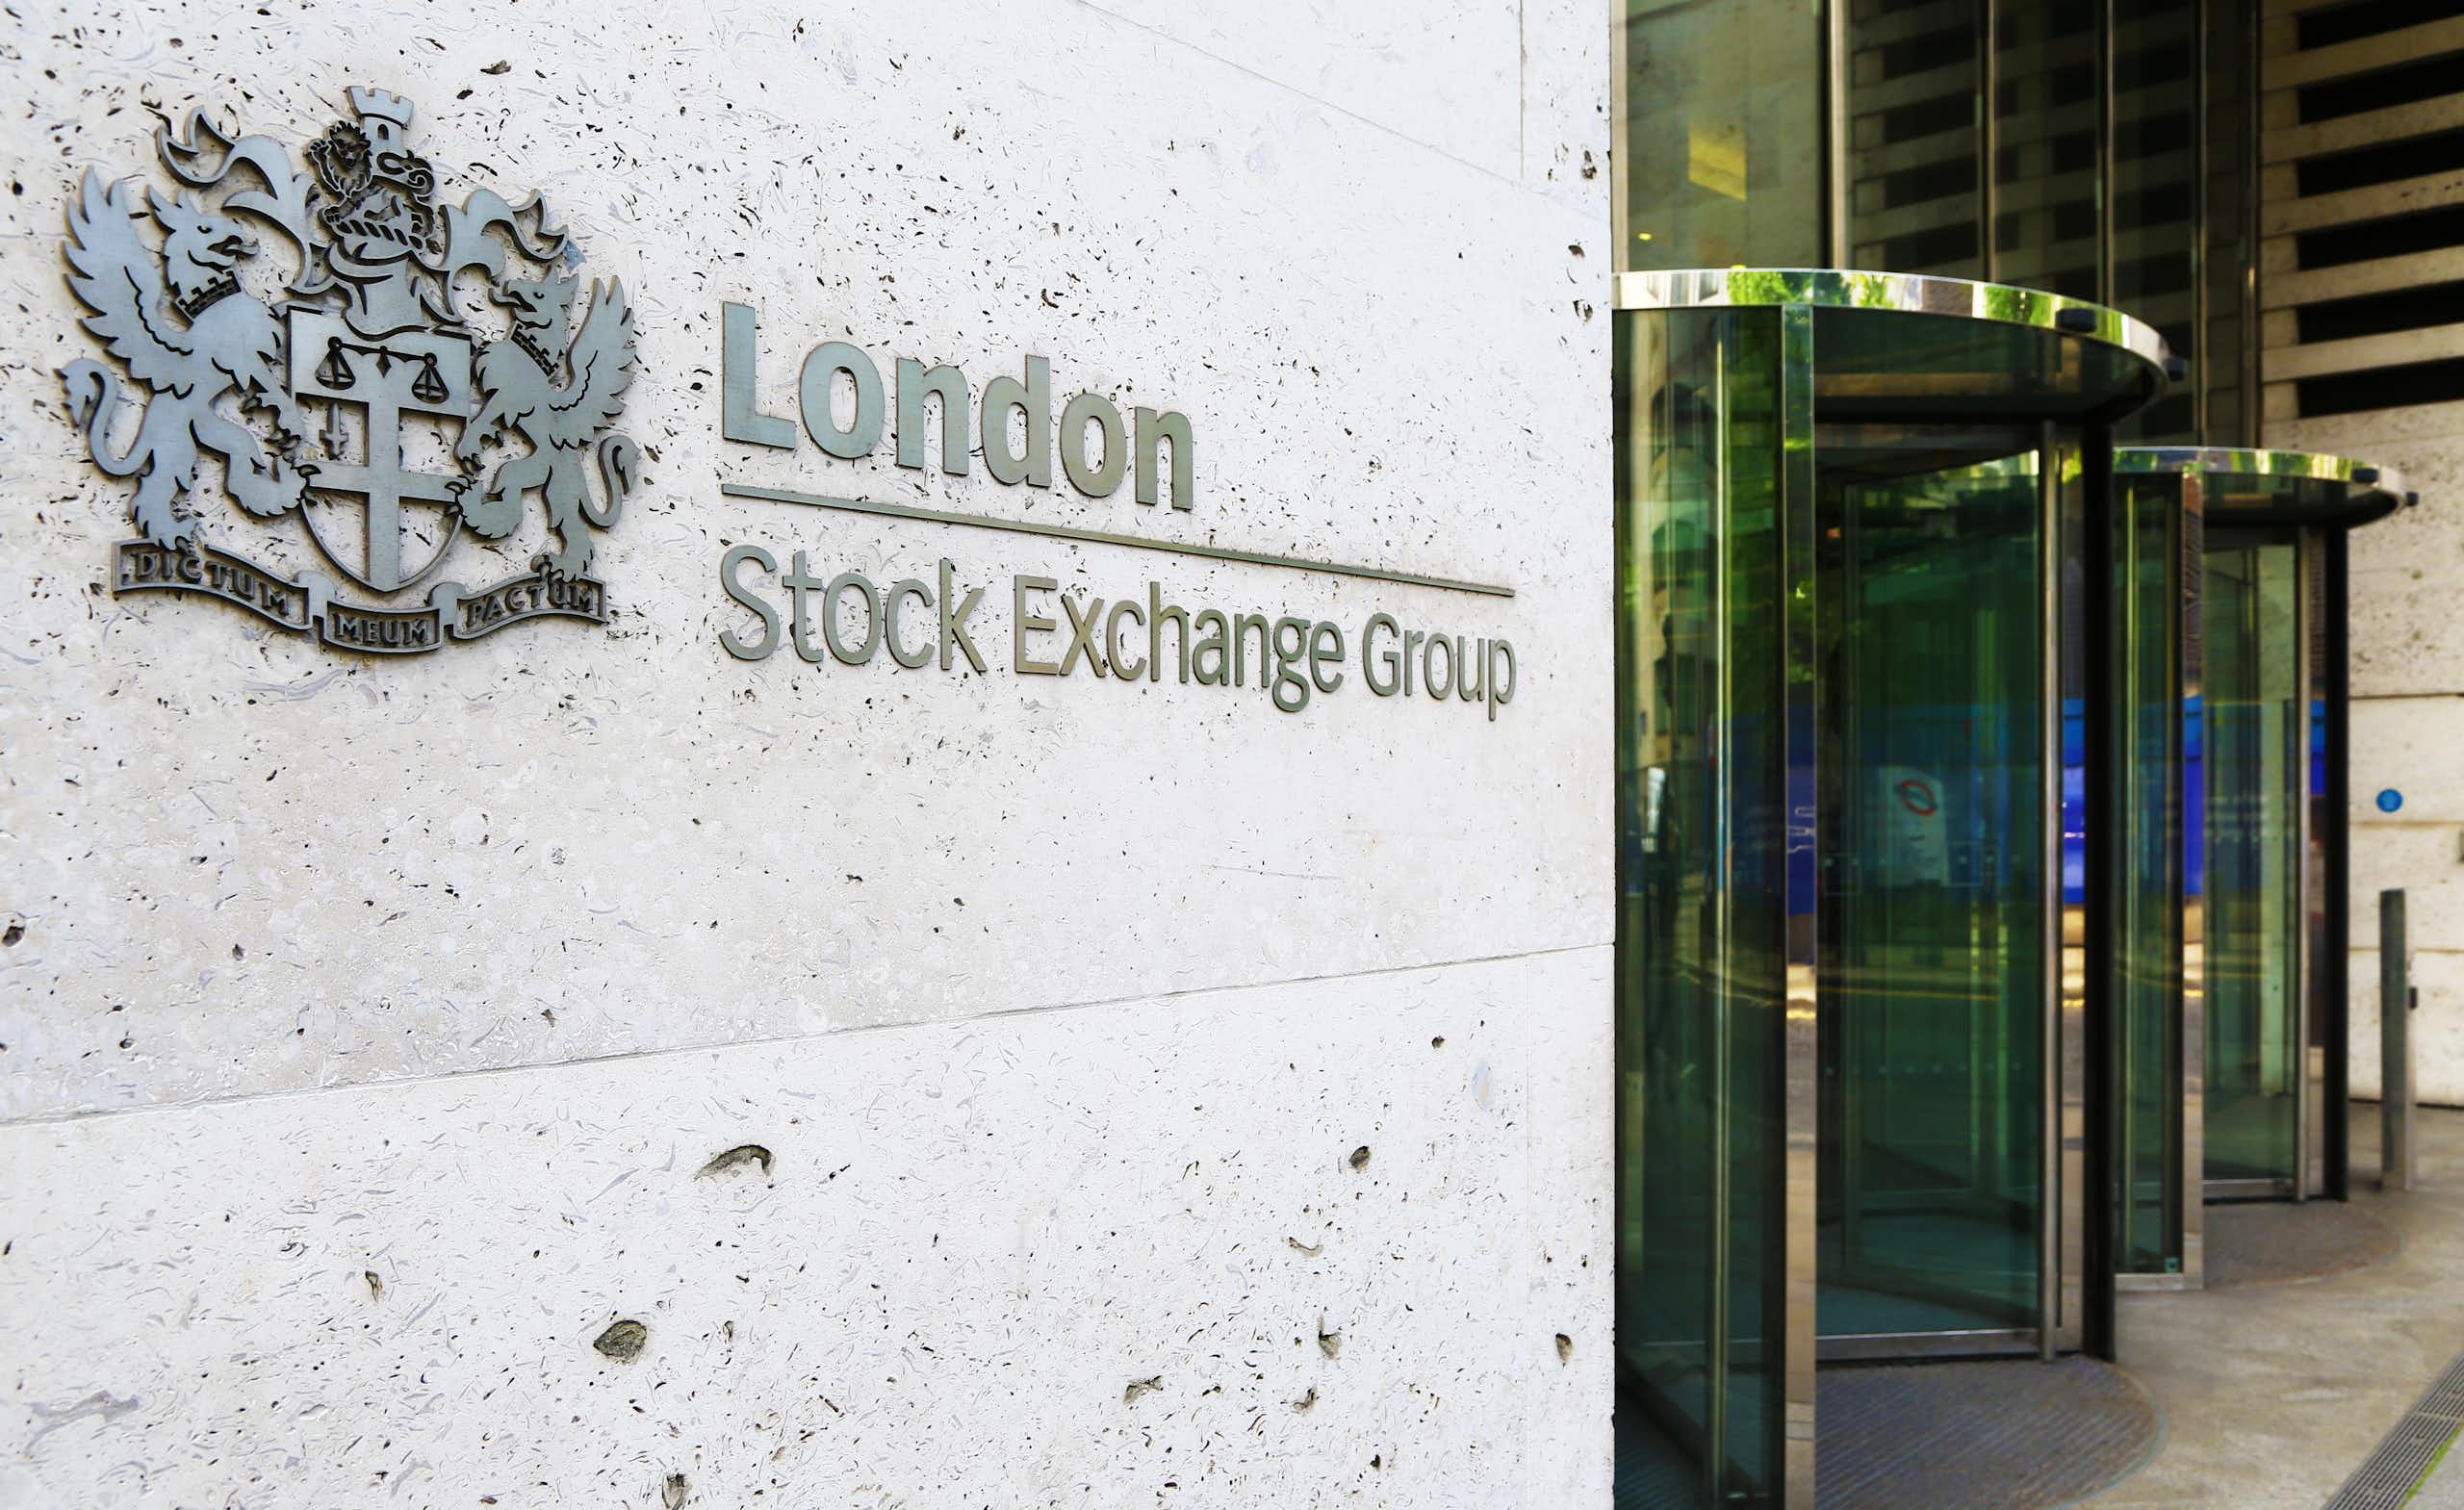 Entrance to the London Stock Exchange